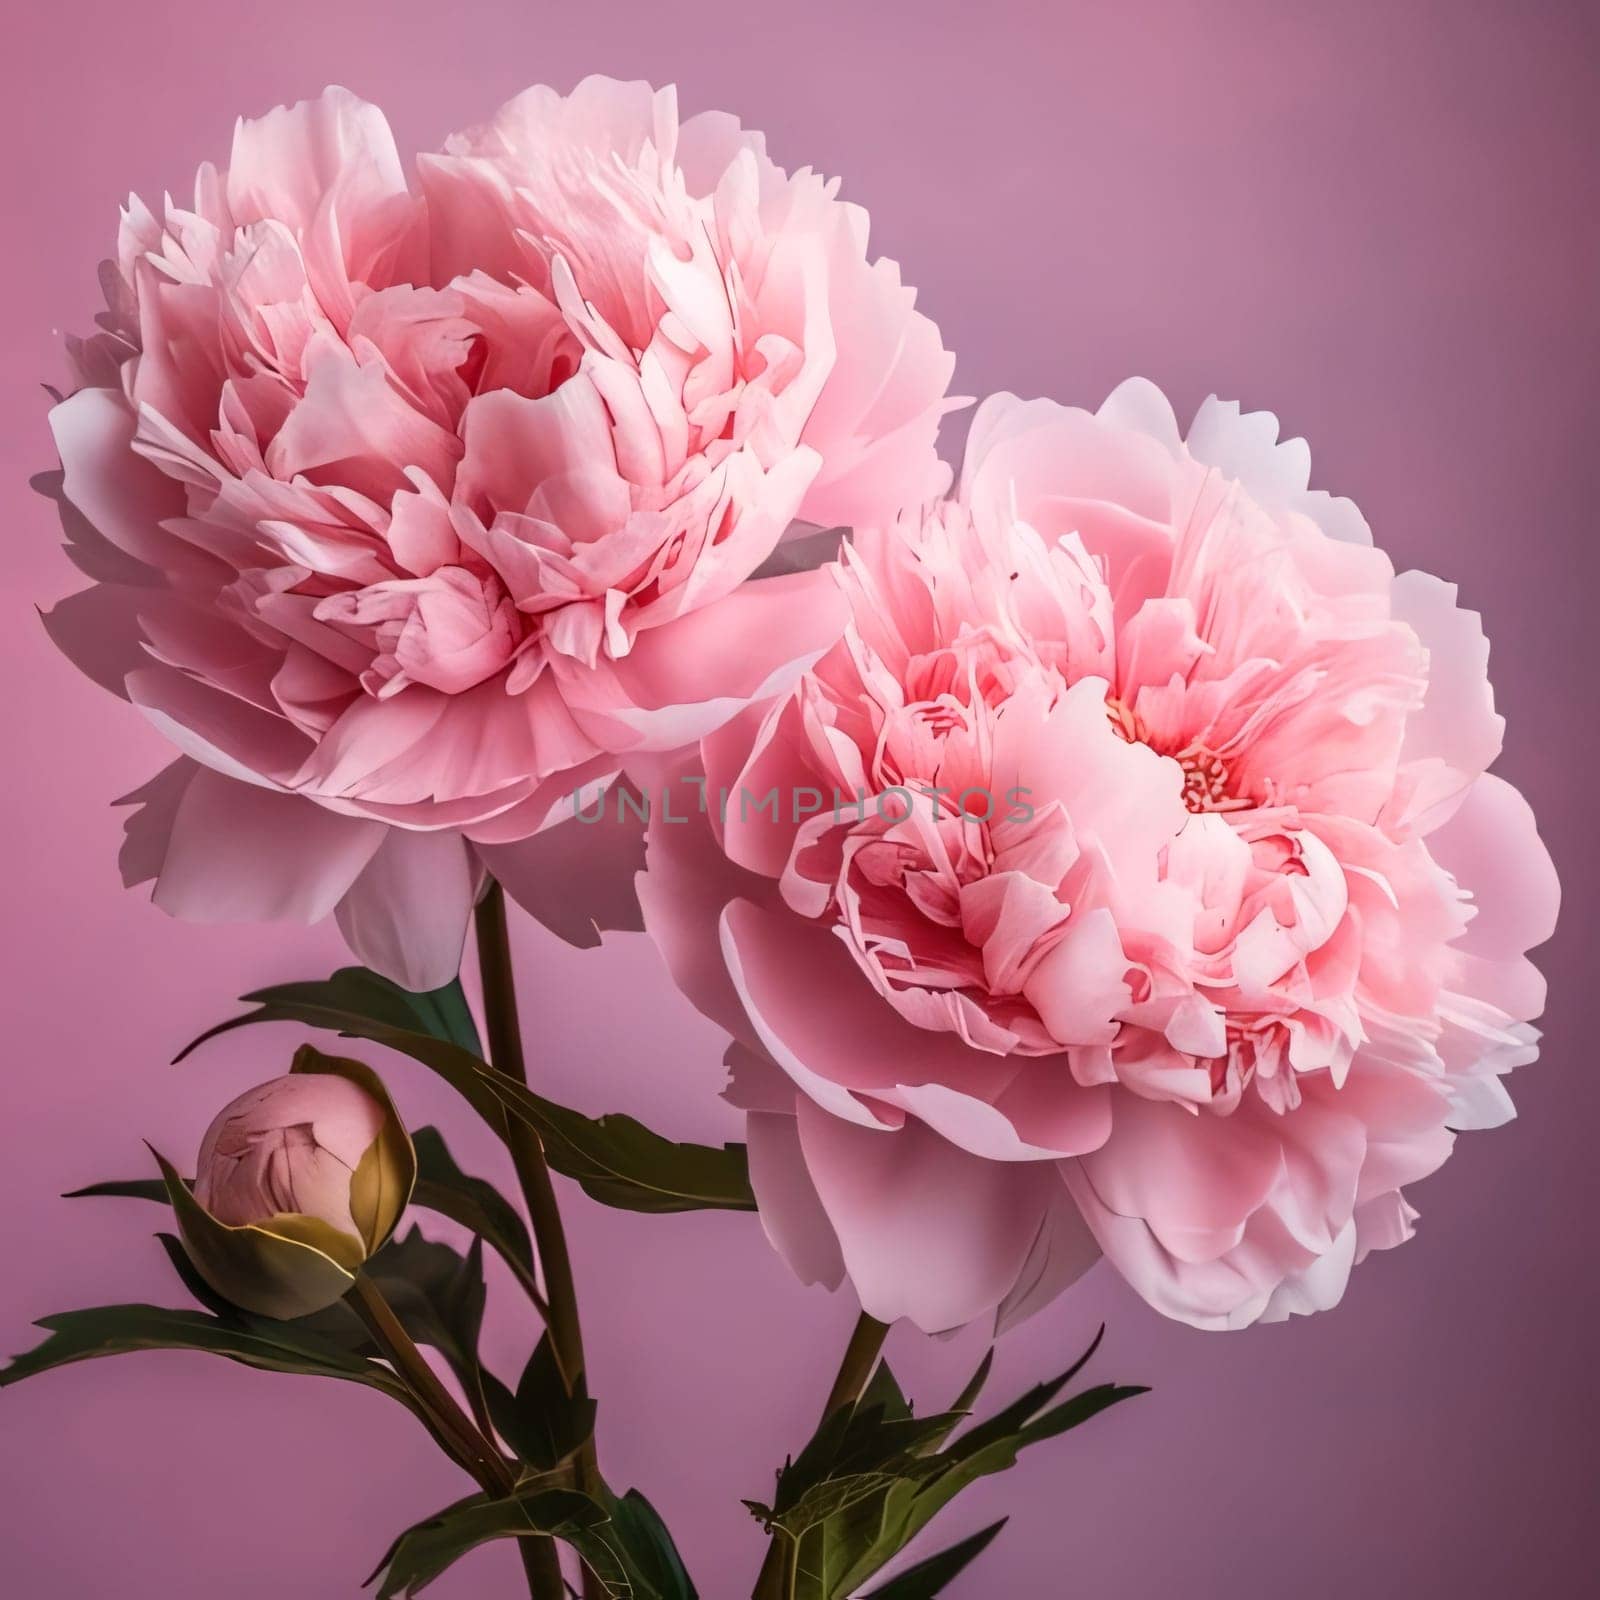 Two pink peony flowers and one bud. Dark background. Flowering flowers, a symbol of spring, new life. A joyful time of nature waking up to life.